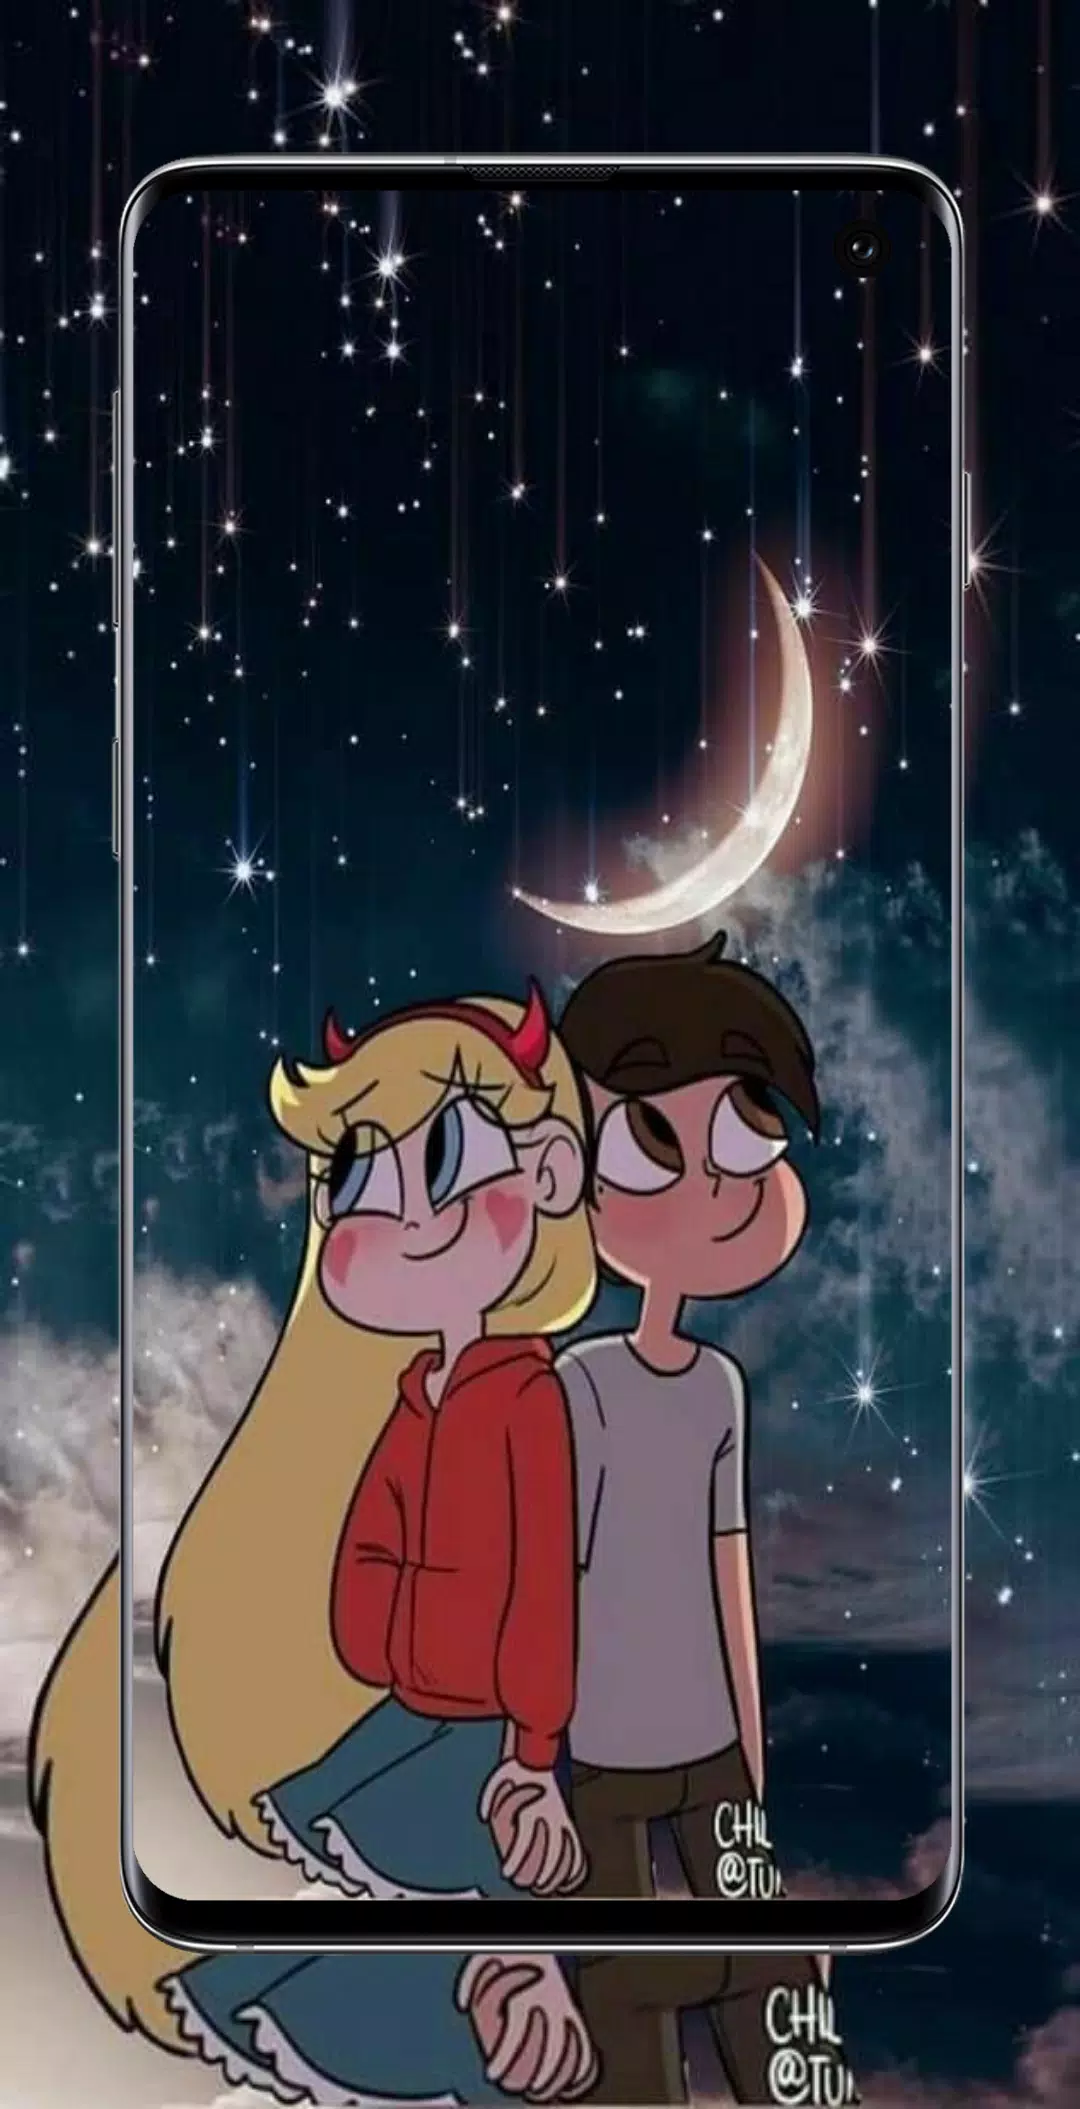 Star Butterfly Wallpapers für Android ...